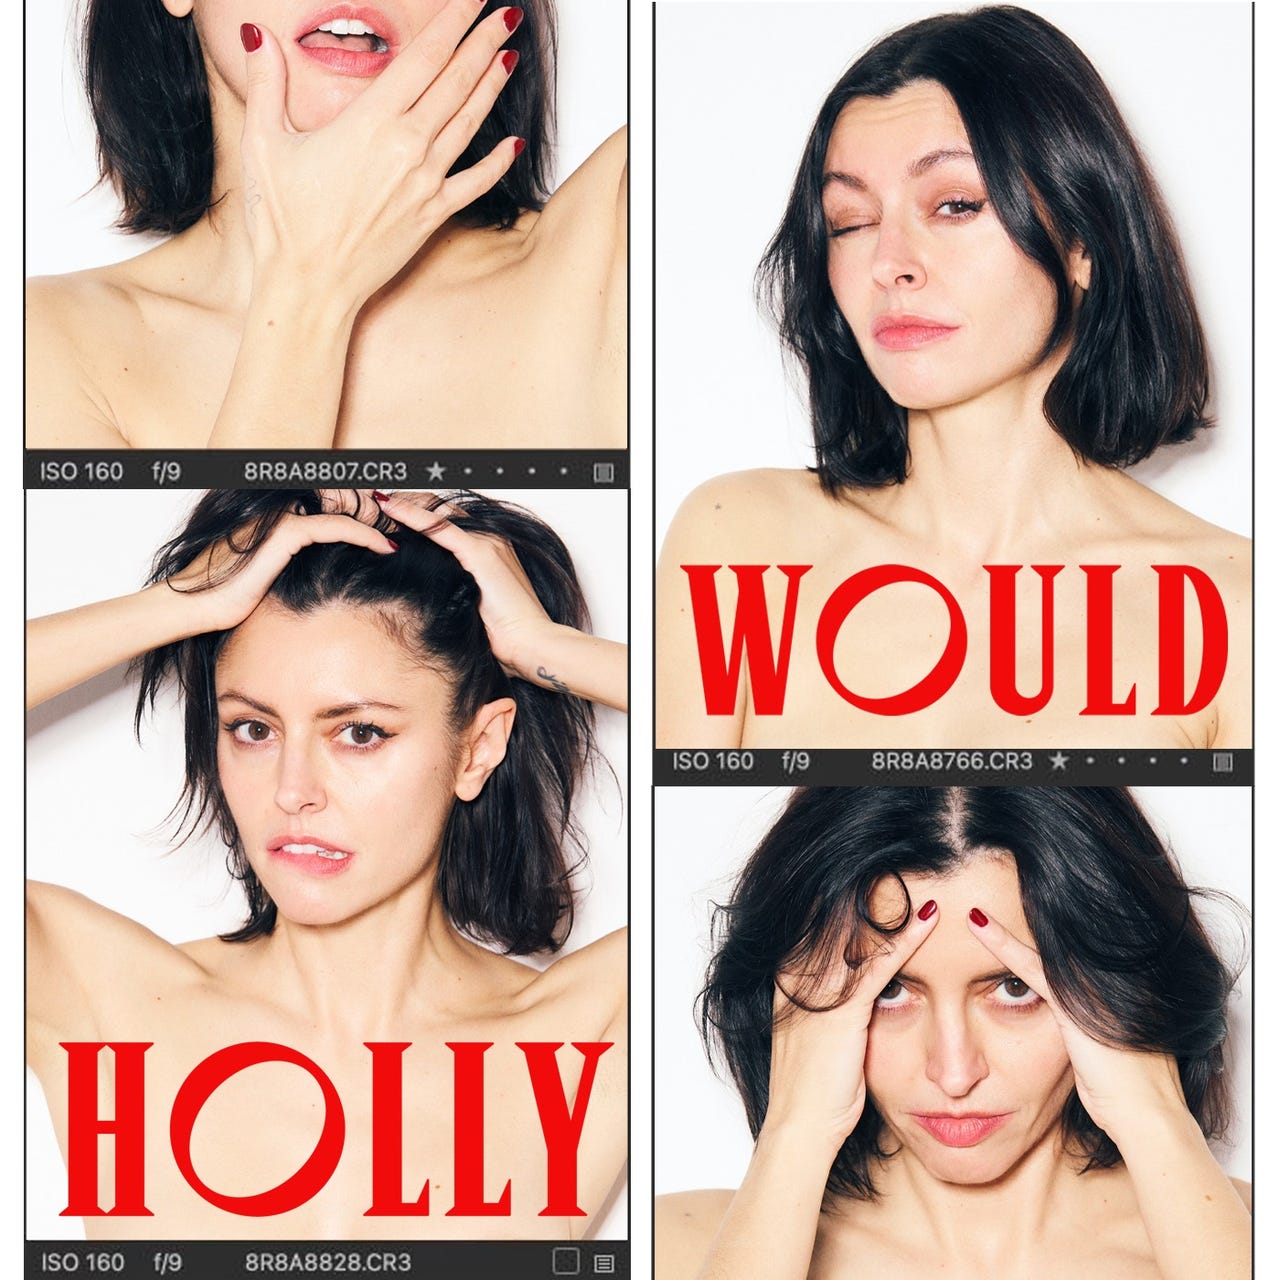 Artwork for HollyWould